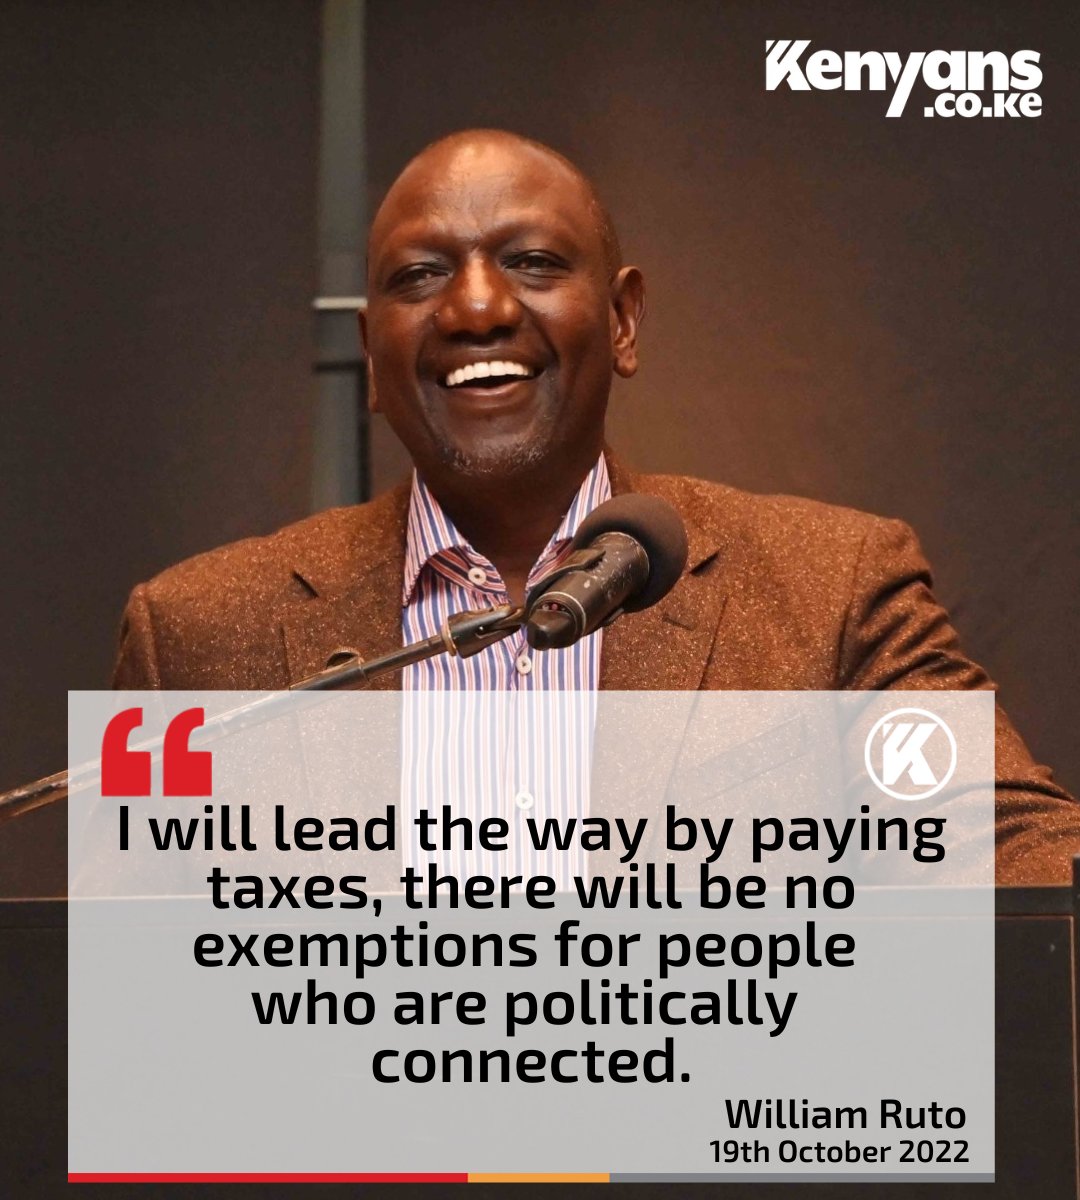 kenyans-co-ke-on-twitter-there-will-be-no-tax-exemptions-for-people